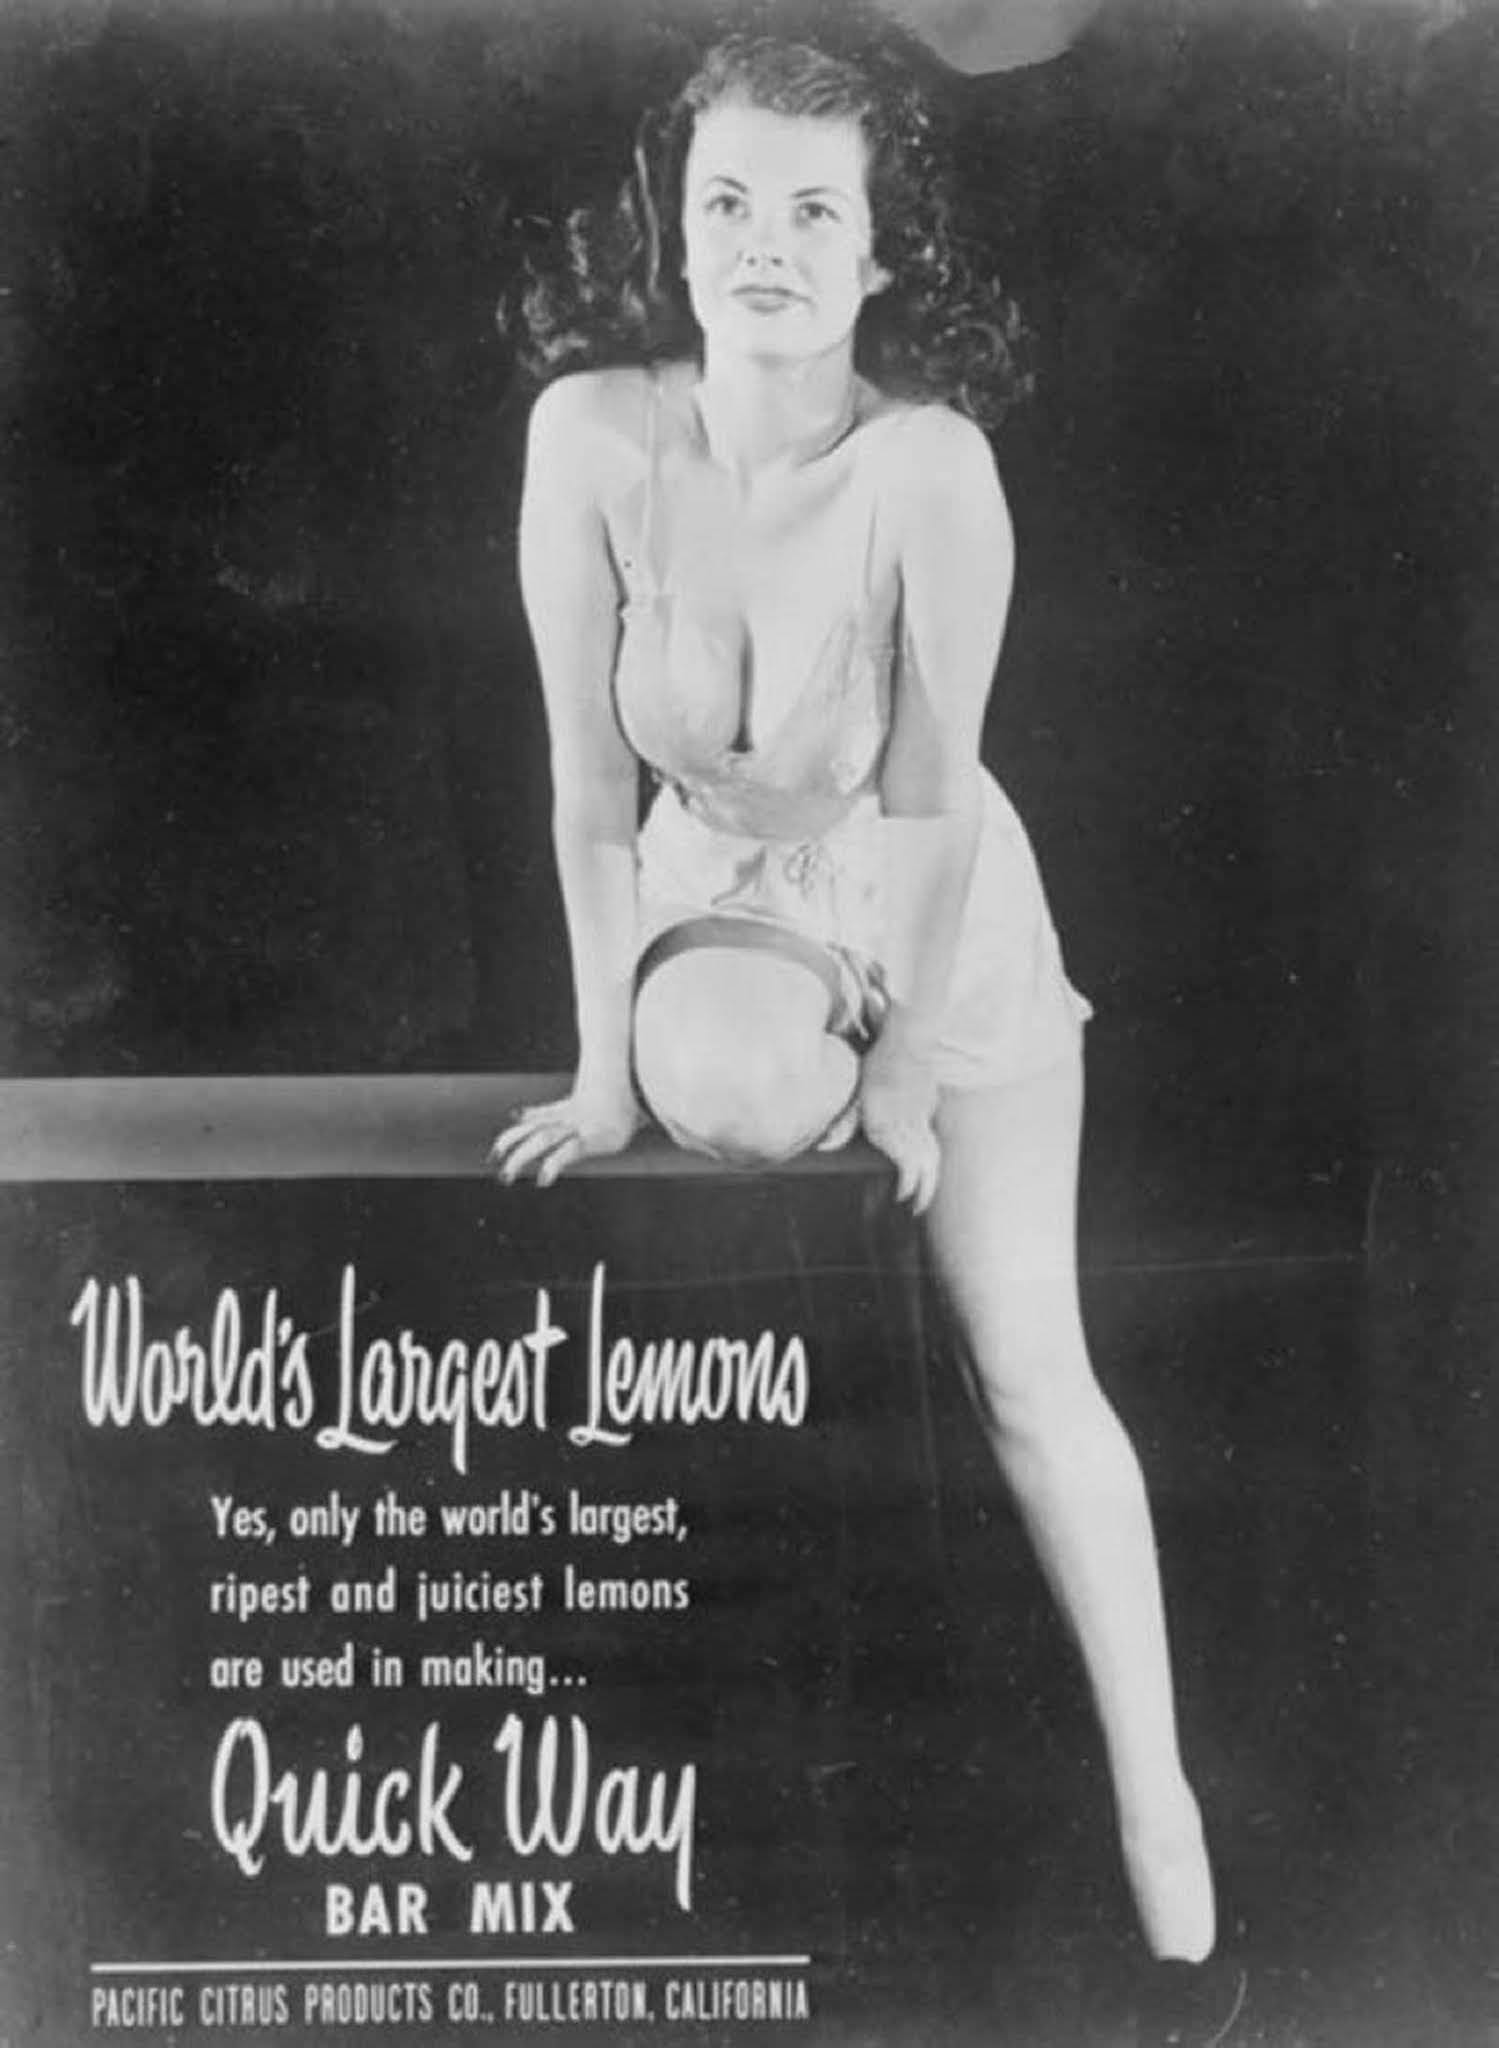 Shocking and Offensive Ads from the Past That Would be Banned Today